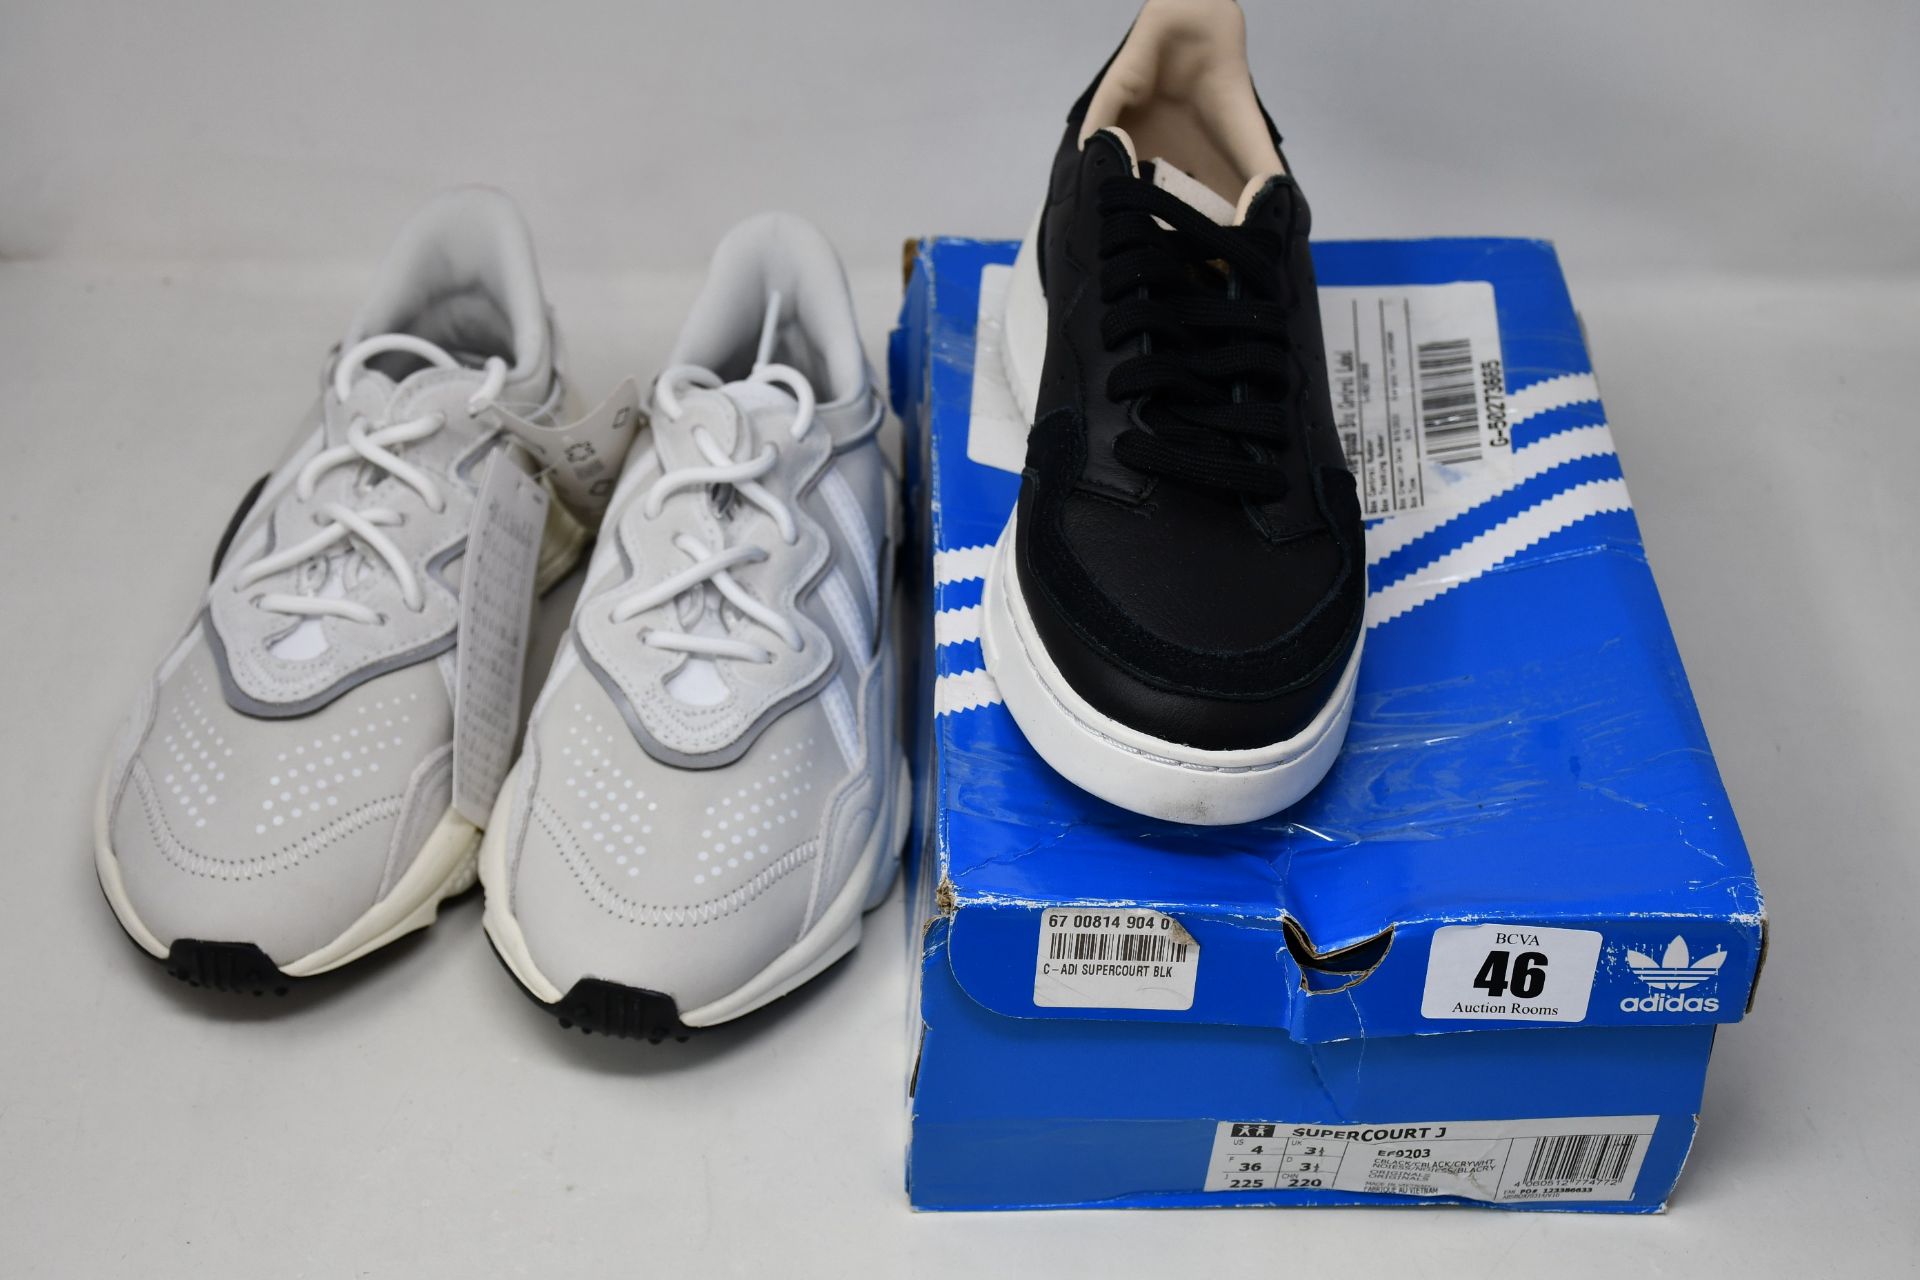 Two pairs of as new Junior Adidas trainers; Ozweego (UK 5 - No box, slight marks on top of back